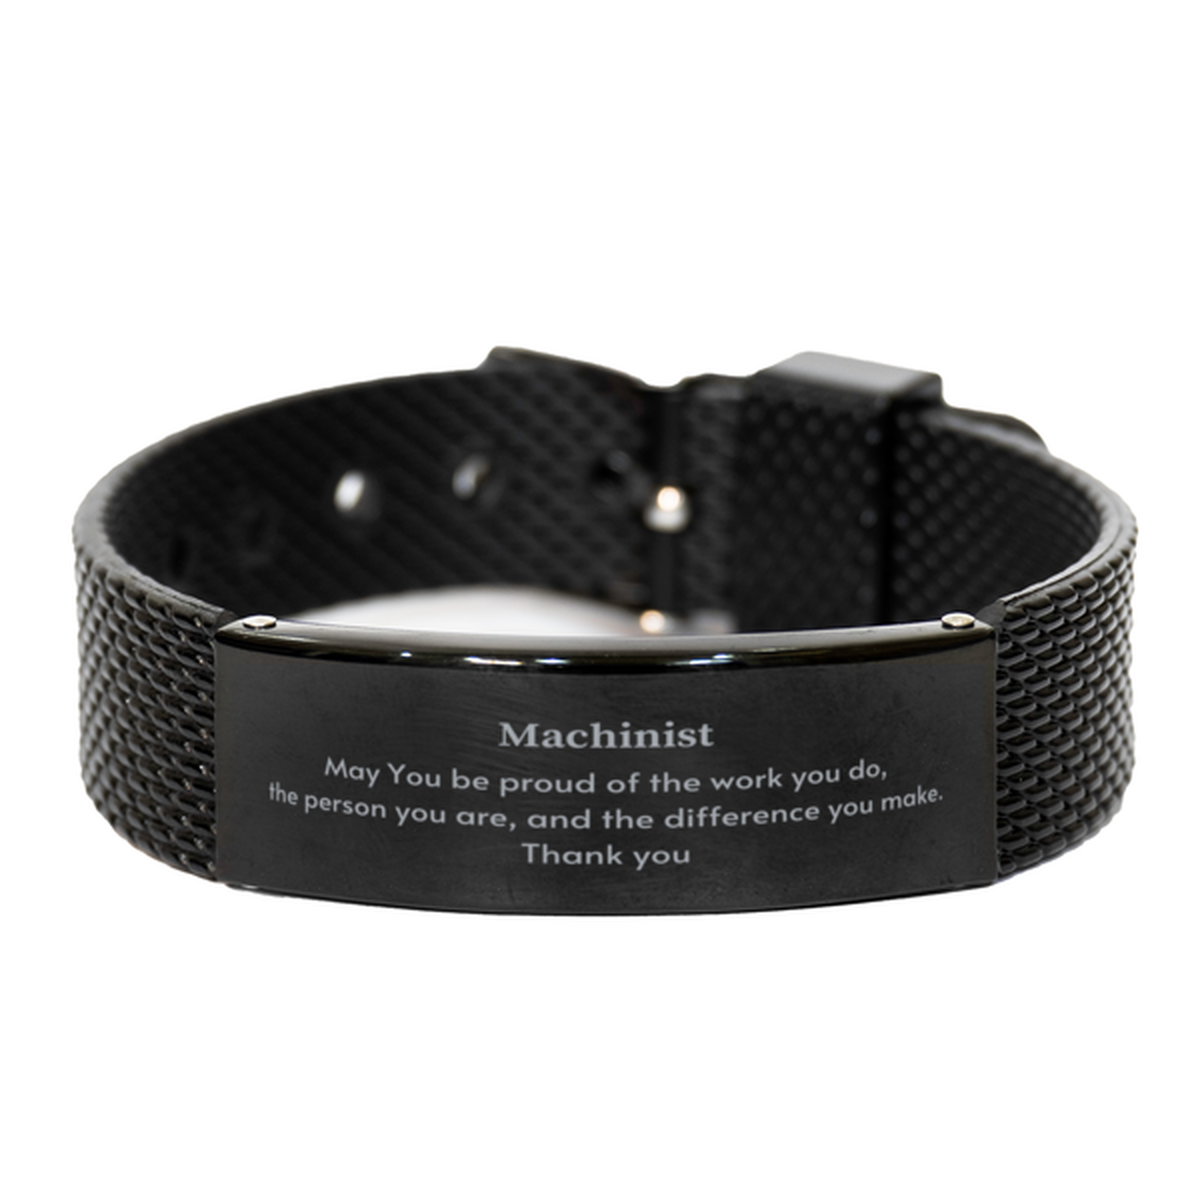 Heartwarming Black Shark Mesh Bracelet Retirement Coworkers Gifts for Machinist, Machinist May You be proud of the work you do, the person you are Gifts for Boss Men Women Friends